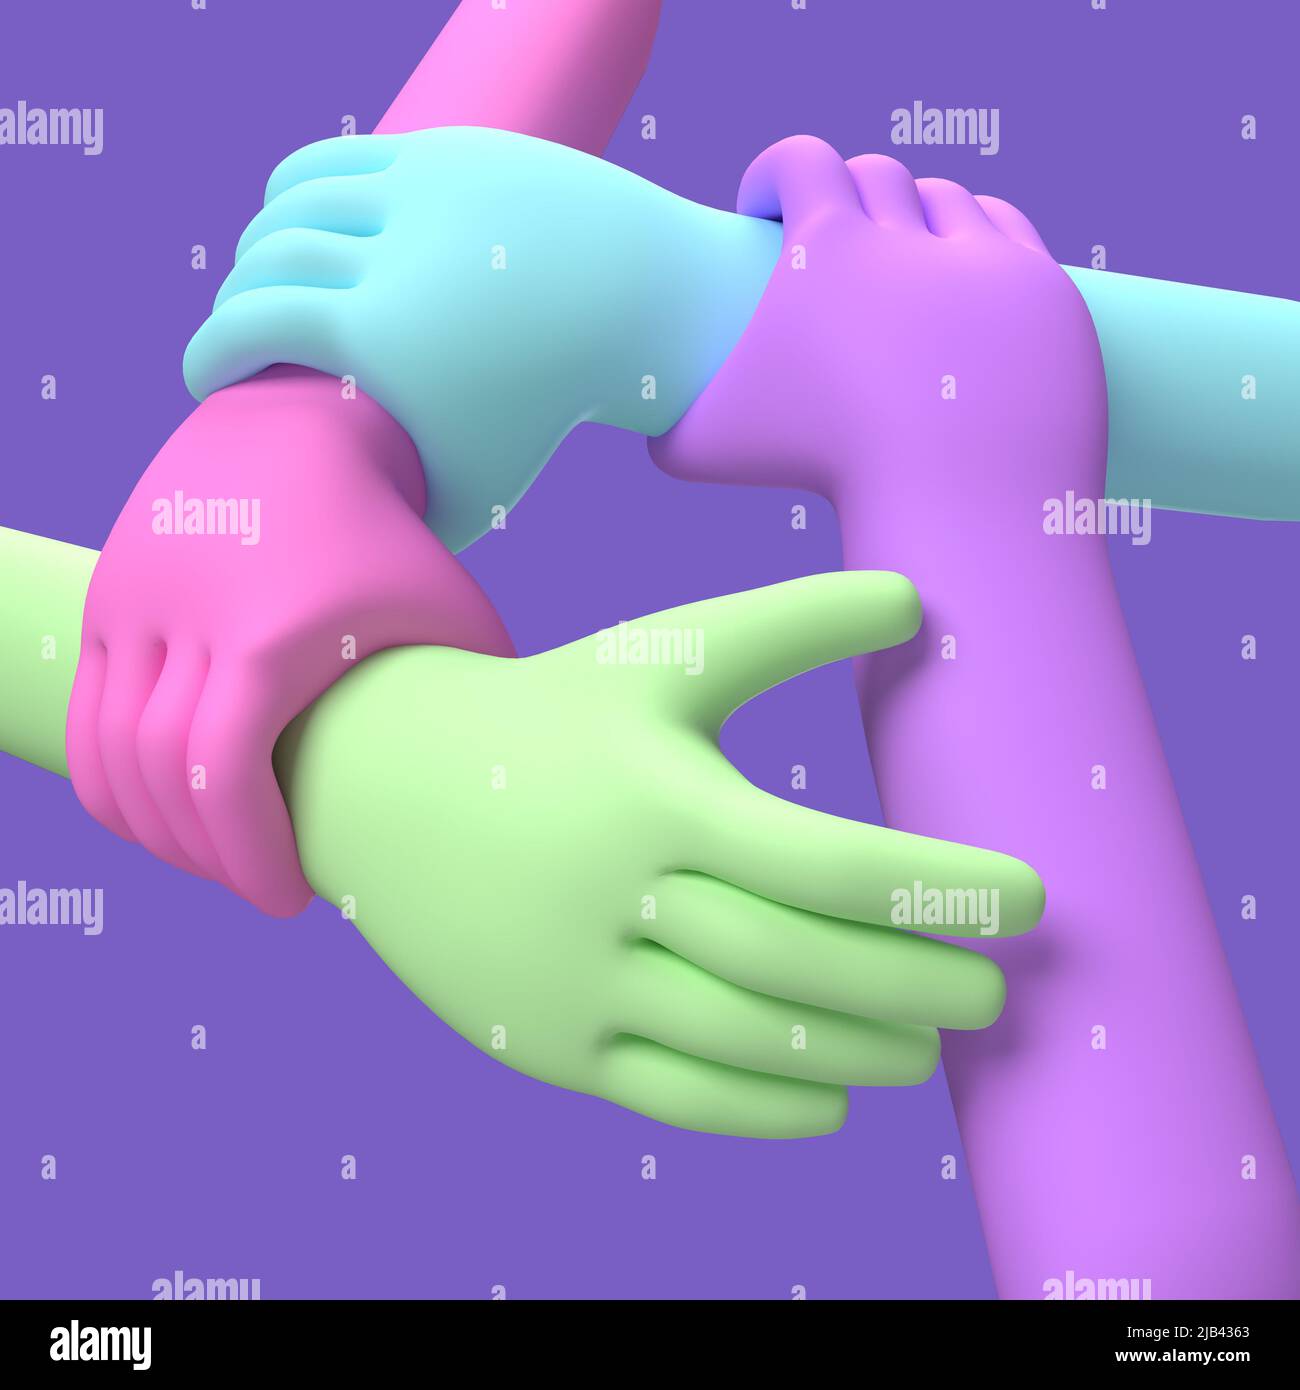 4 hands reliable mutual support and mutual assistance  3d illustration Stock Photo